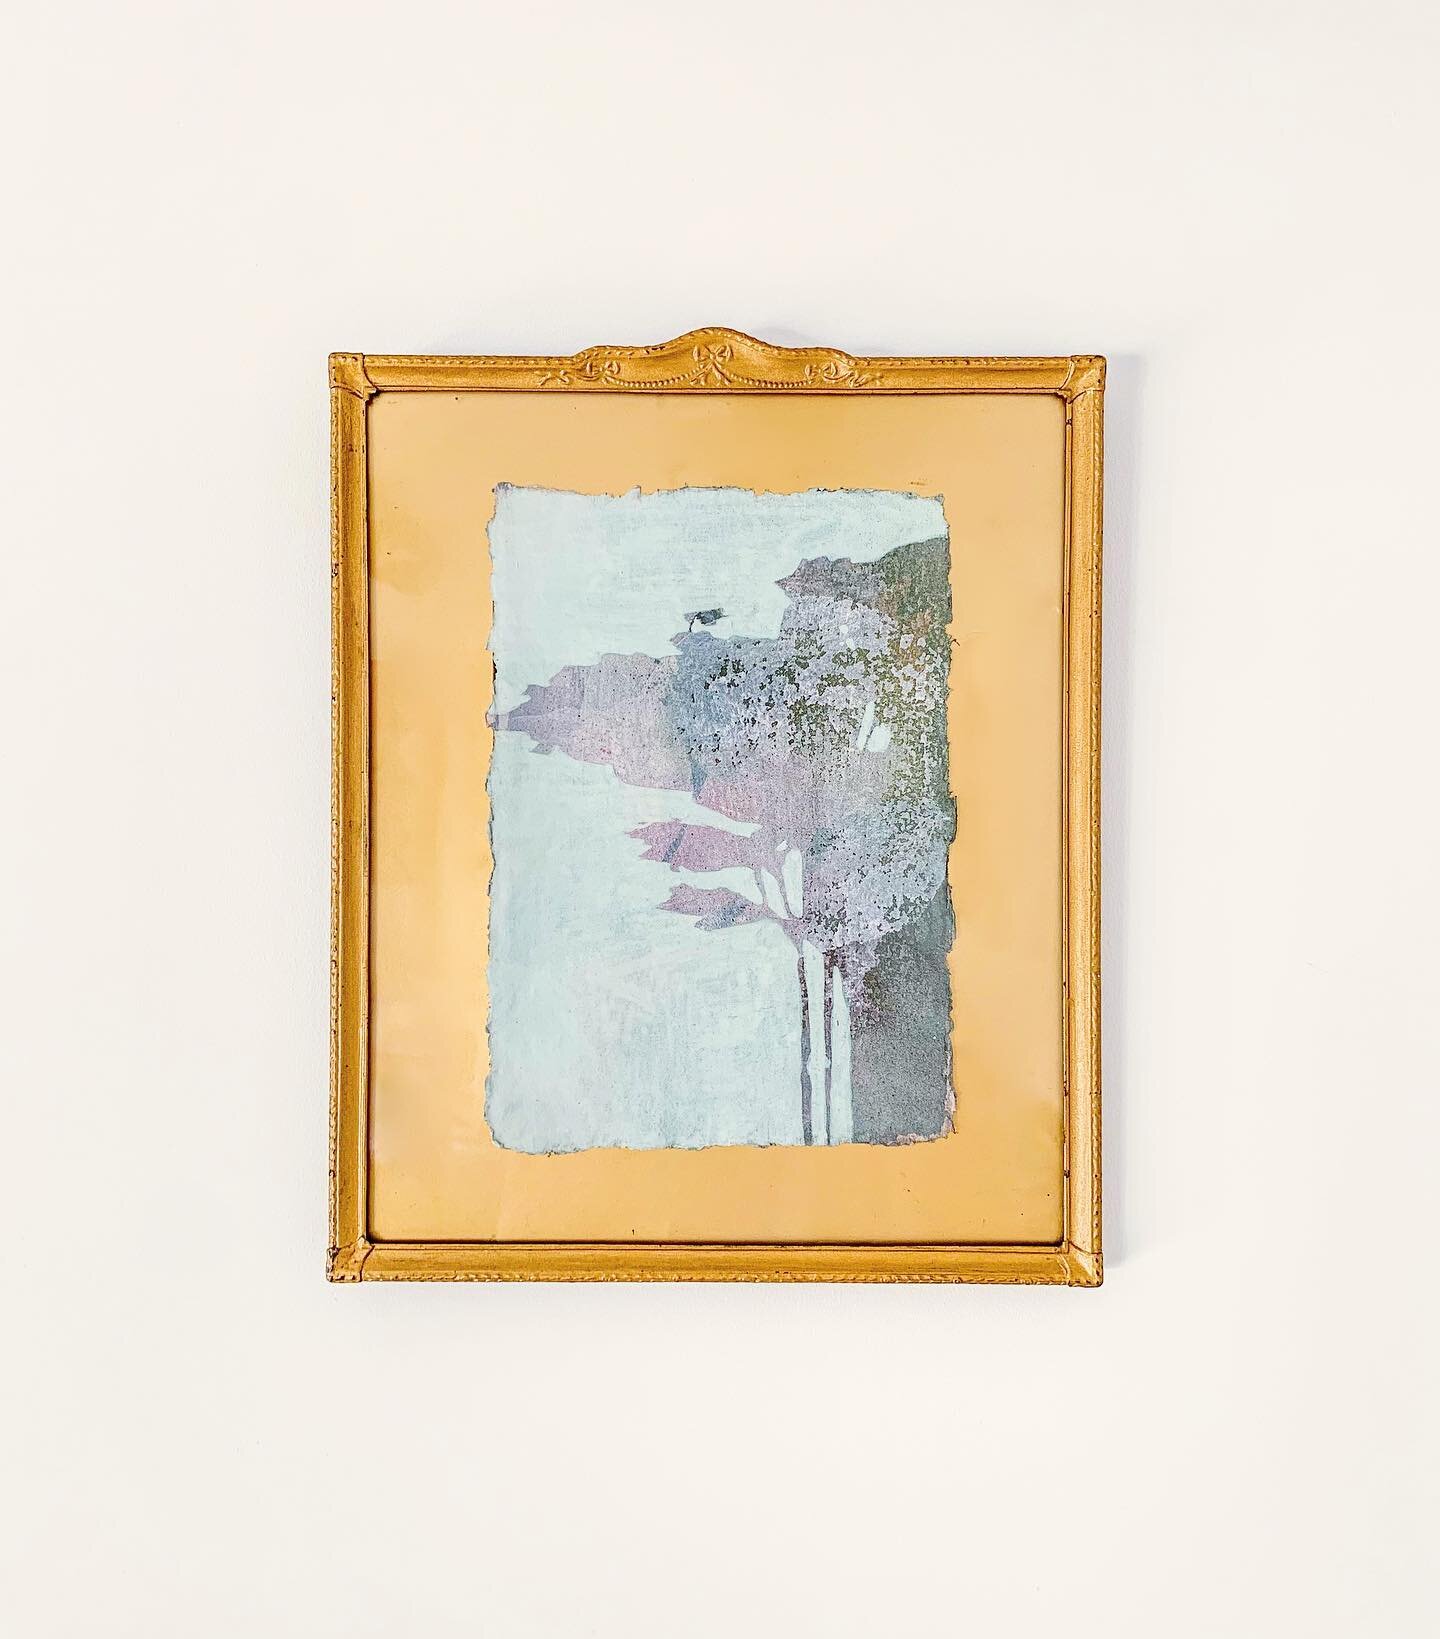 I&rsquo;ve had fun playing around with placing my small works on paper in frames. This is No.18 currently available via my online shop. 
.
I&rsquo;ve placed the painting in an antique frame with a gold mount, which really complements the ochre tones 